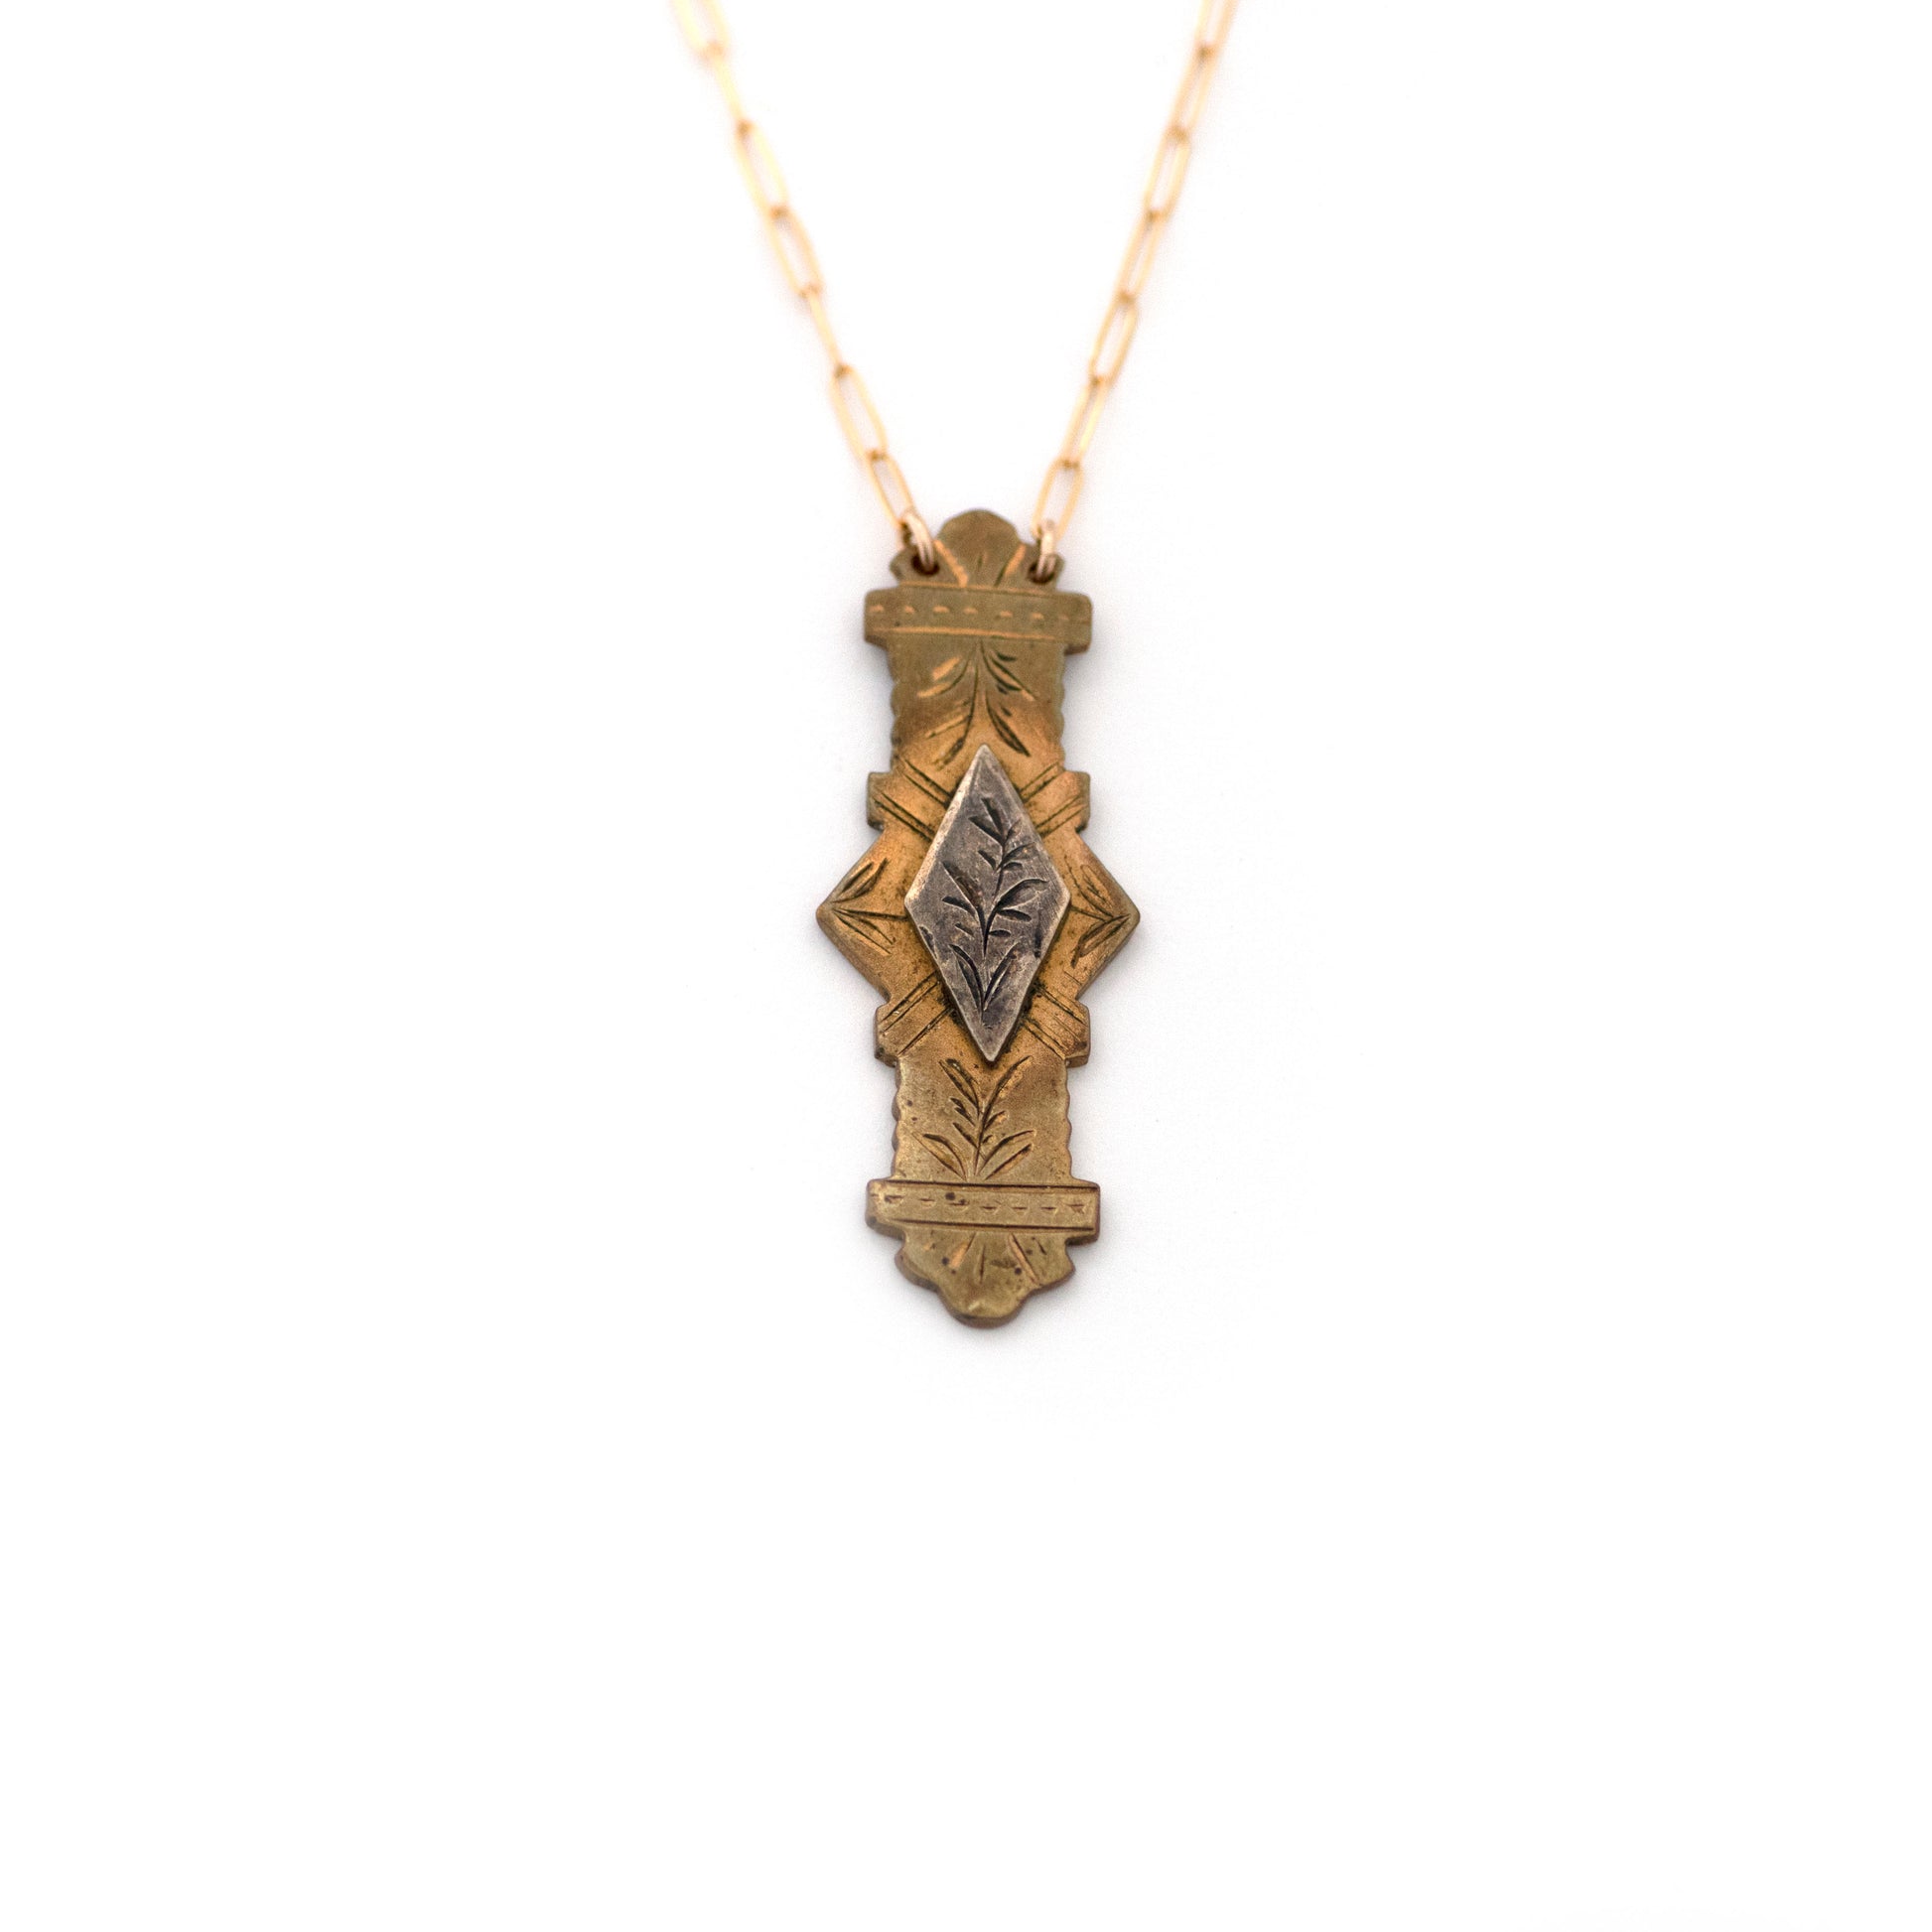 This one-of-a-kind conversion necklace is made up of:  Sterling on Brass Victorian bar pin pendant from the late 1800s with hand engraved details. Pendant measures 0.6" wide and 1.6" tall. Aesthetic Movement.